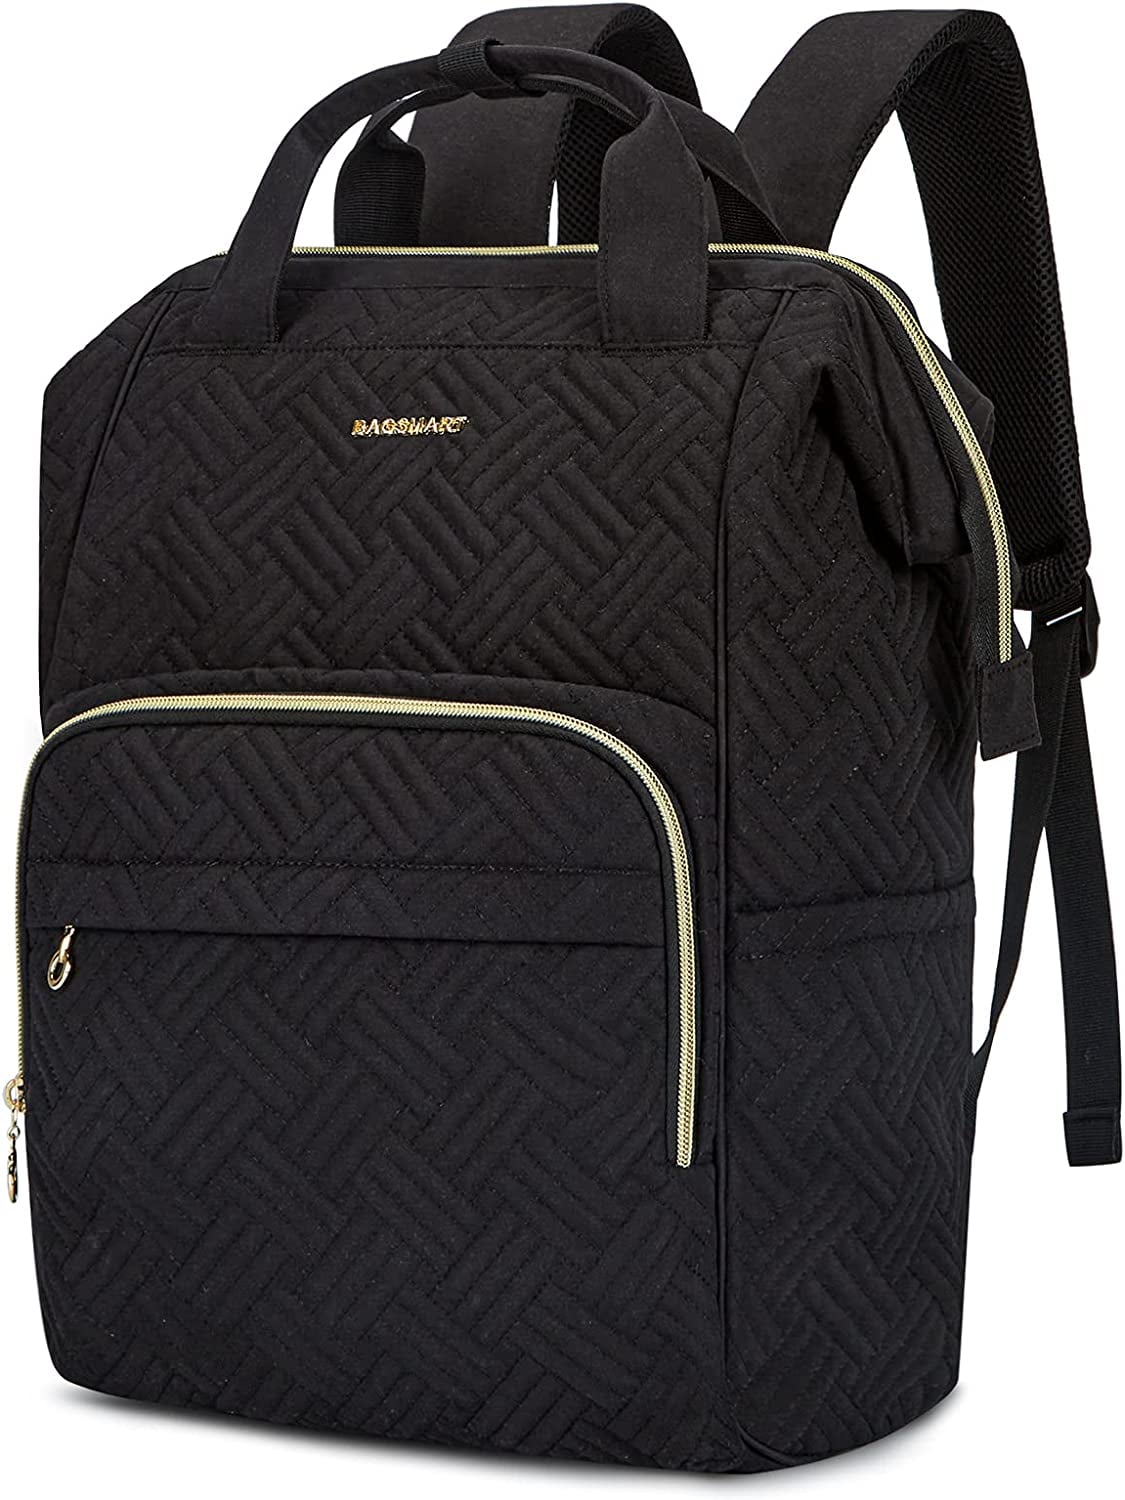 <p><a href="https://www.amazon.com/BAGSMART-Backpack-Stylish-Resistant-Business/dp/B093WTFJHL">BUY NOW</a></p><p>$28</p><p><a href="https://www.amazon.com/BAGSMART-Backpack-Stylish-Resistant-Business/dp/B093WTFJHL" class="ga-track"><strong>BAGSMART Laptop Backpack </strong></a> ($28, originally $40) </p><p>"If you're someone who travels for work, you should also think about purchasing a do-it-all personal item bag, one that can carry your essentials along with your laptop at changers," says Mansel. She loves the <a href="https://www.loandsons.com/products/rowledge-nylon-black-gold-grey" class="ga-track">Lo & Sons Rowledge Backpack</a> ($326, originally $465) and the <a href="https://www.cuyana.com/bags/small-easy-tote/10010070.html?dwvar_10010070_color=cappuccino" class="ga-track">Cuyana Zip-Top Tote</a> ($228), though this one's highly rated on Amazon, with a spacious interior and a stylish stitched exterior.</p>